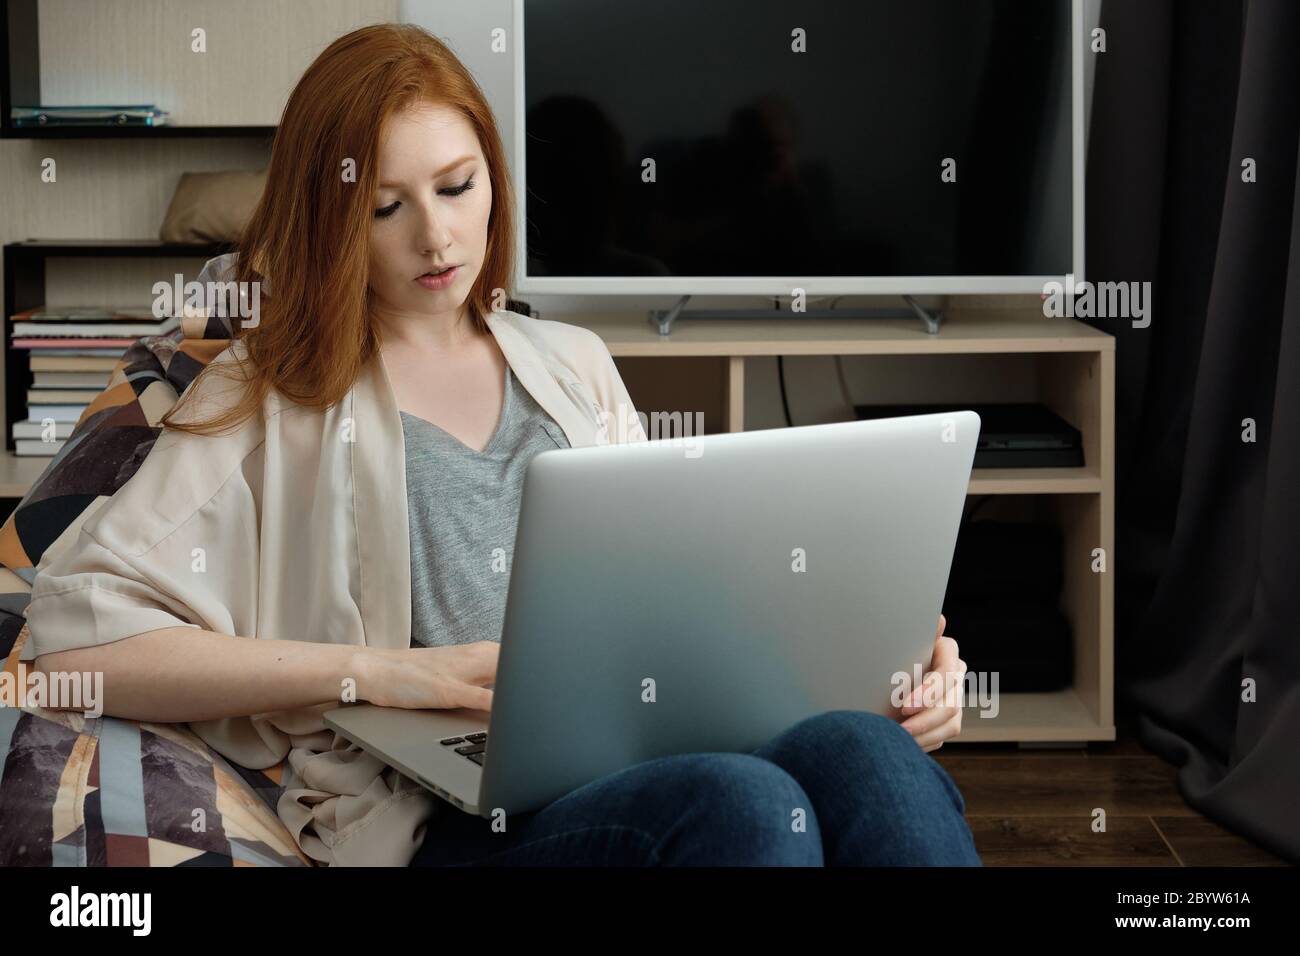 Red-haired girl sitting in a chair at home looking at a laptop on her lap Stock Photo